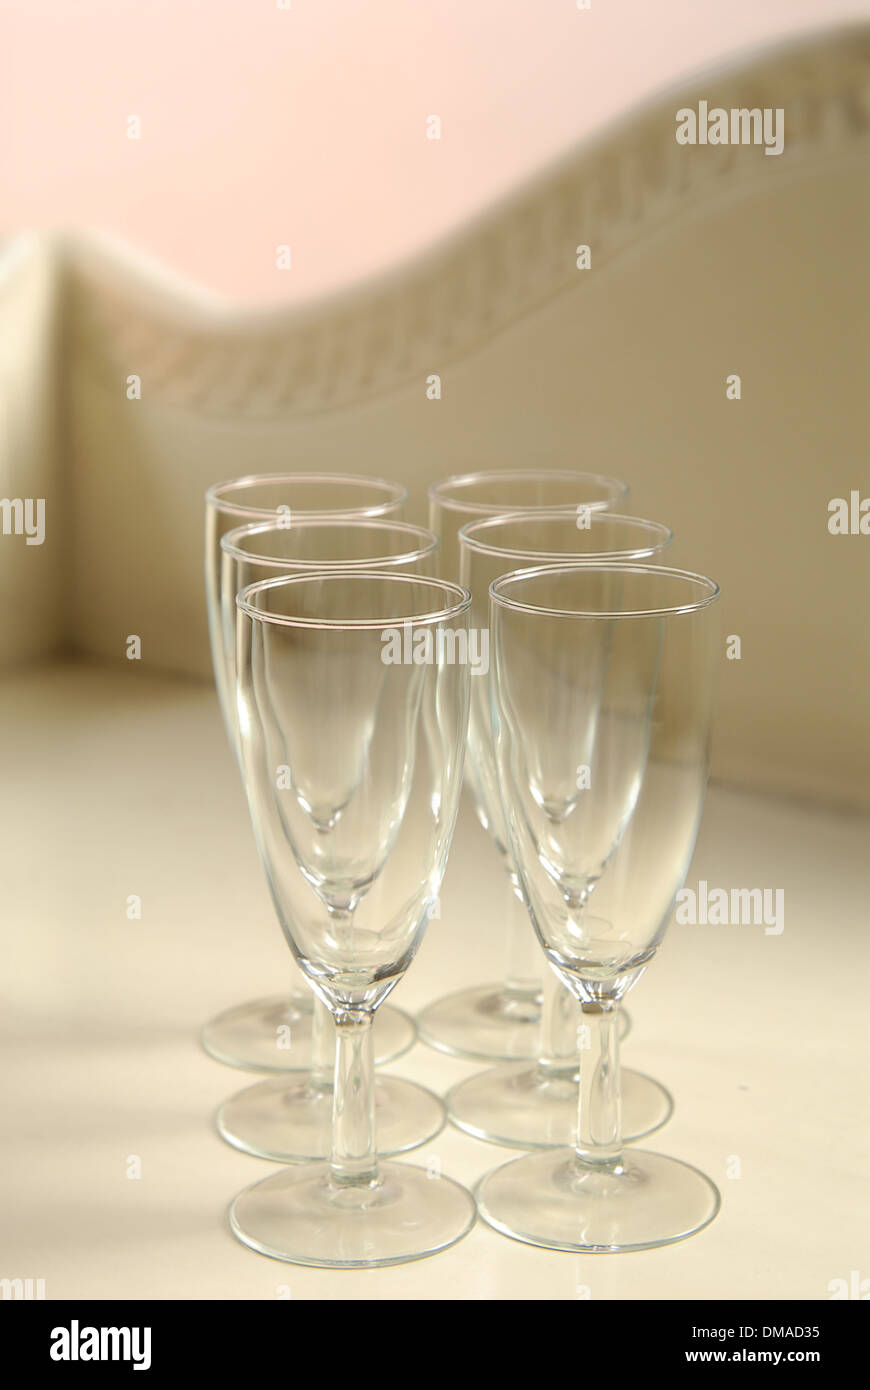 Empty champagne glasses on a light background Stock Photo